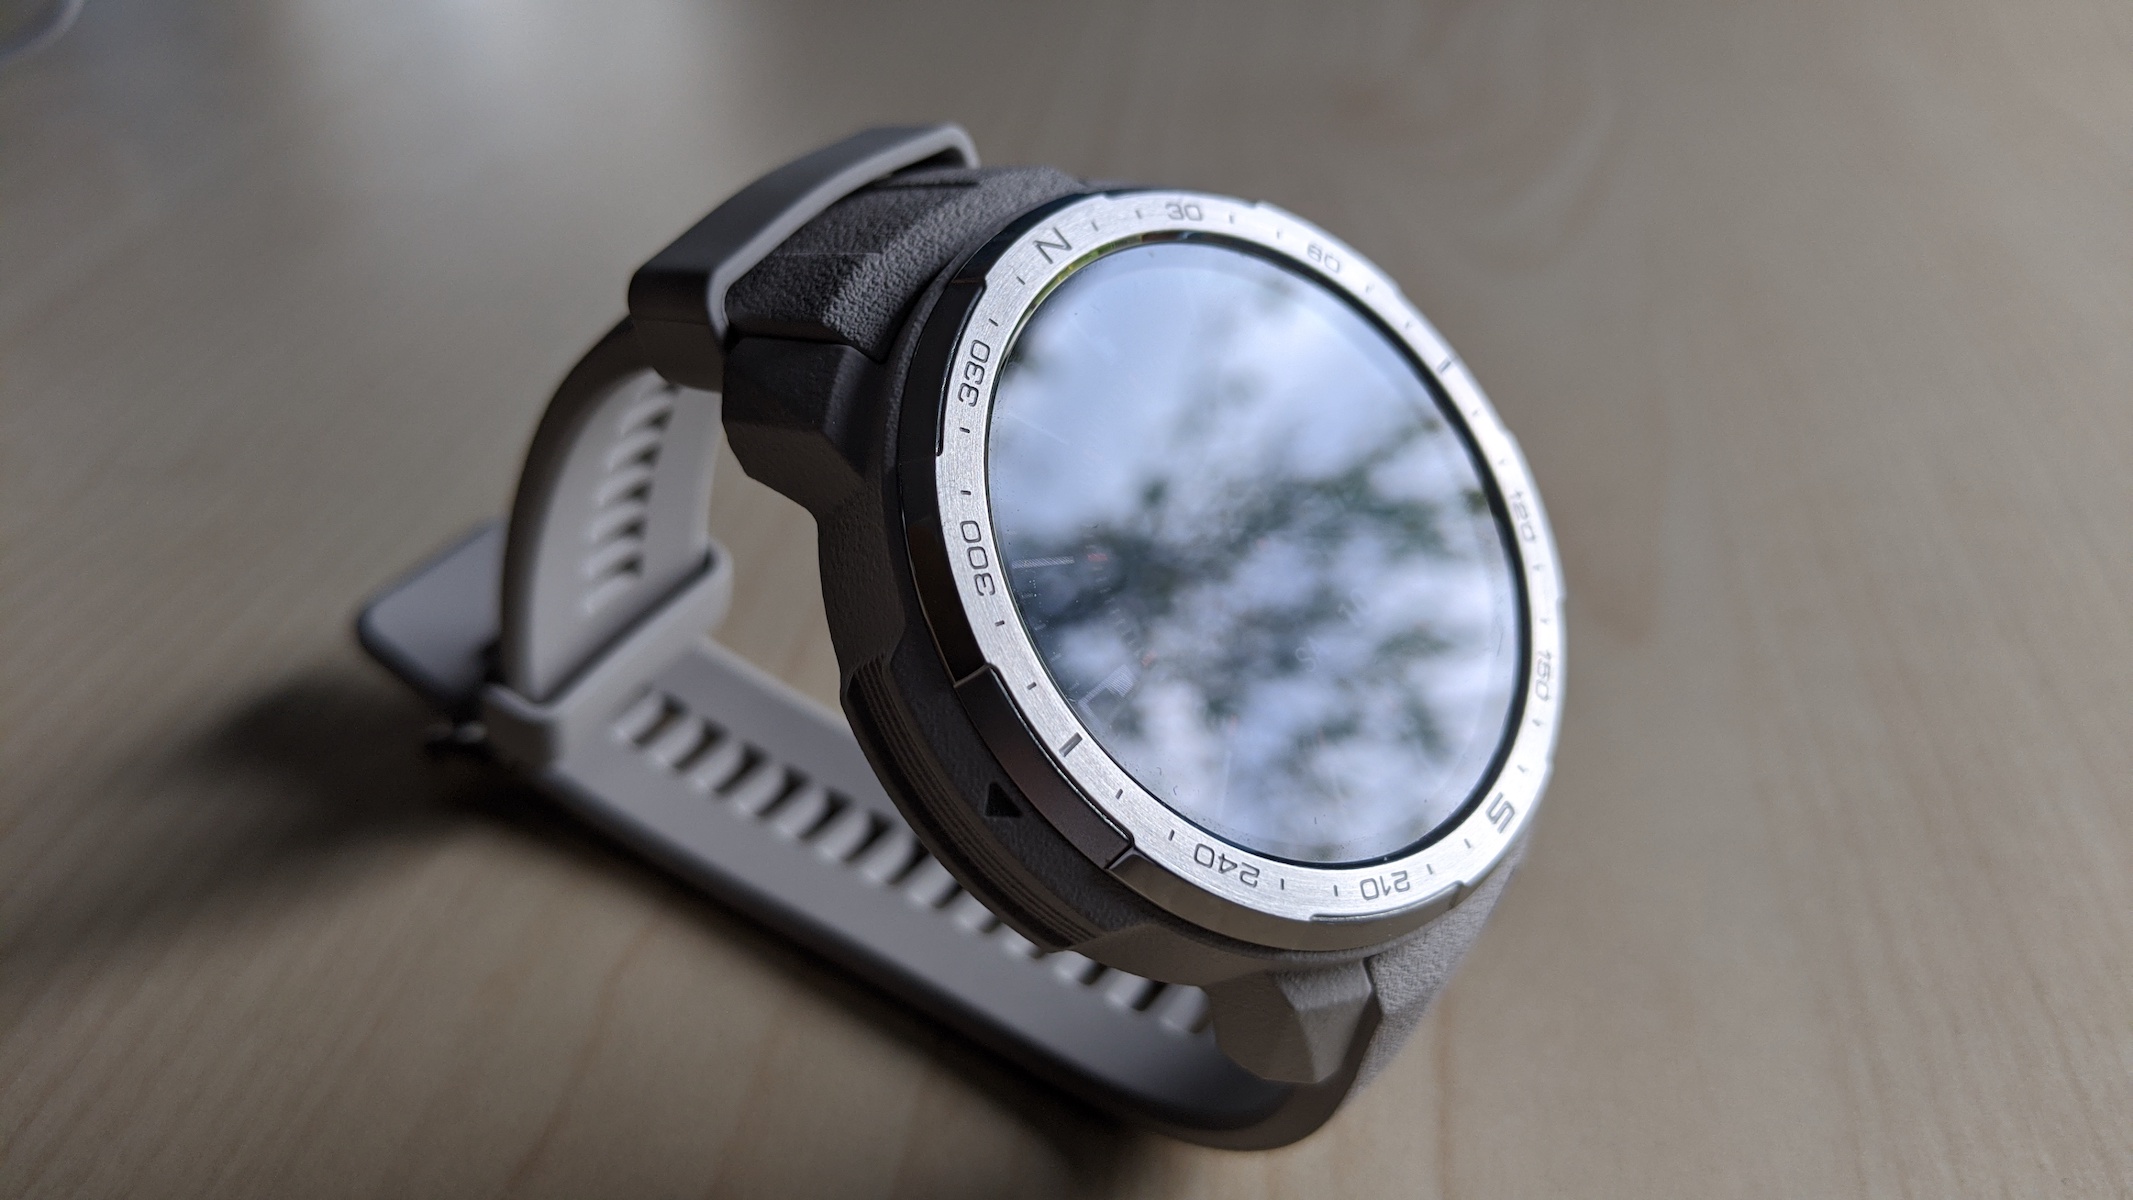 Honor Watch GS Pro Review: Adventurers Only - Tech Advisor